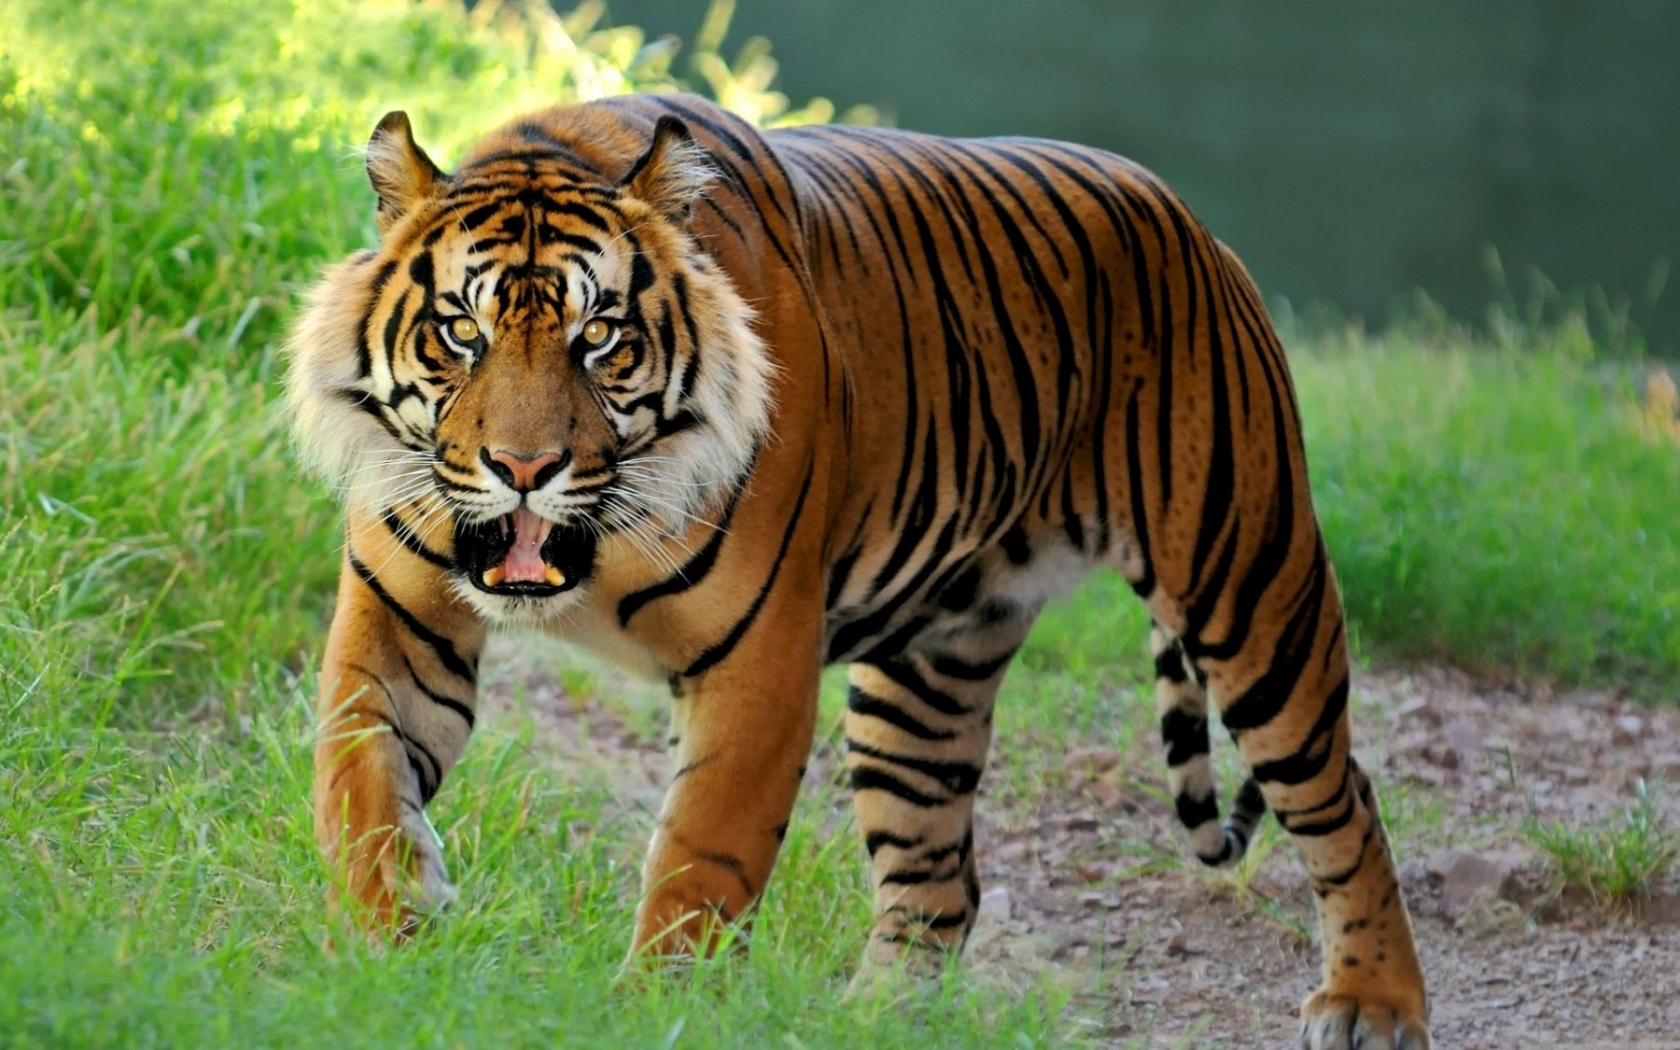 46465 download wallpaper animals, tigers screensavers and pictures for free